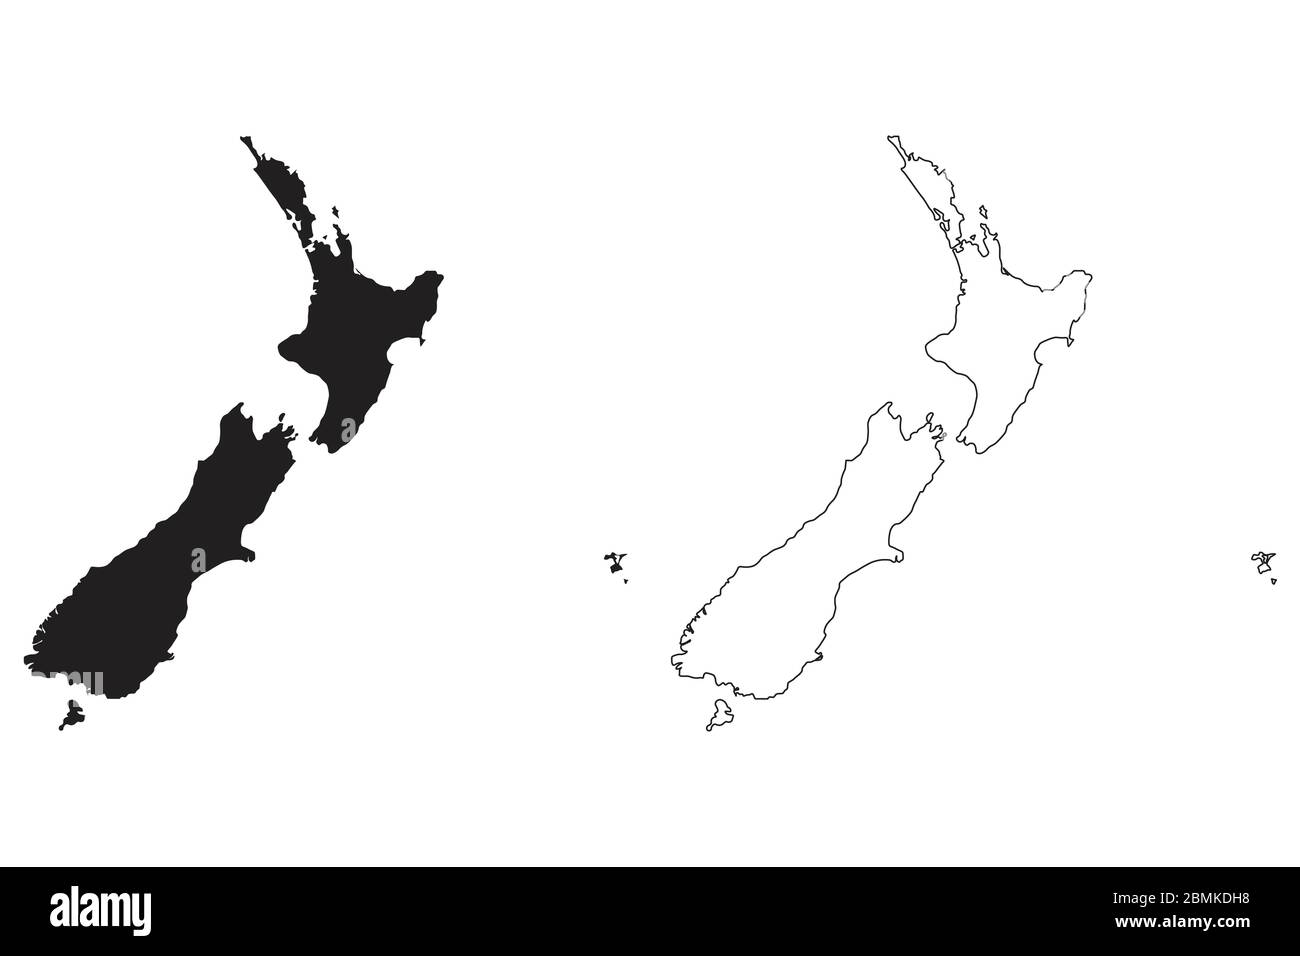 New Zealand Country Map. Black silhouette and outline isolated on white background. EPS Vector Stock Vector